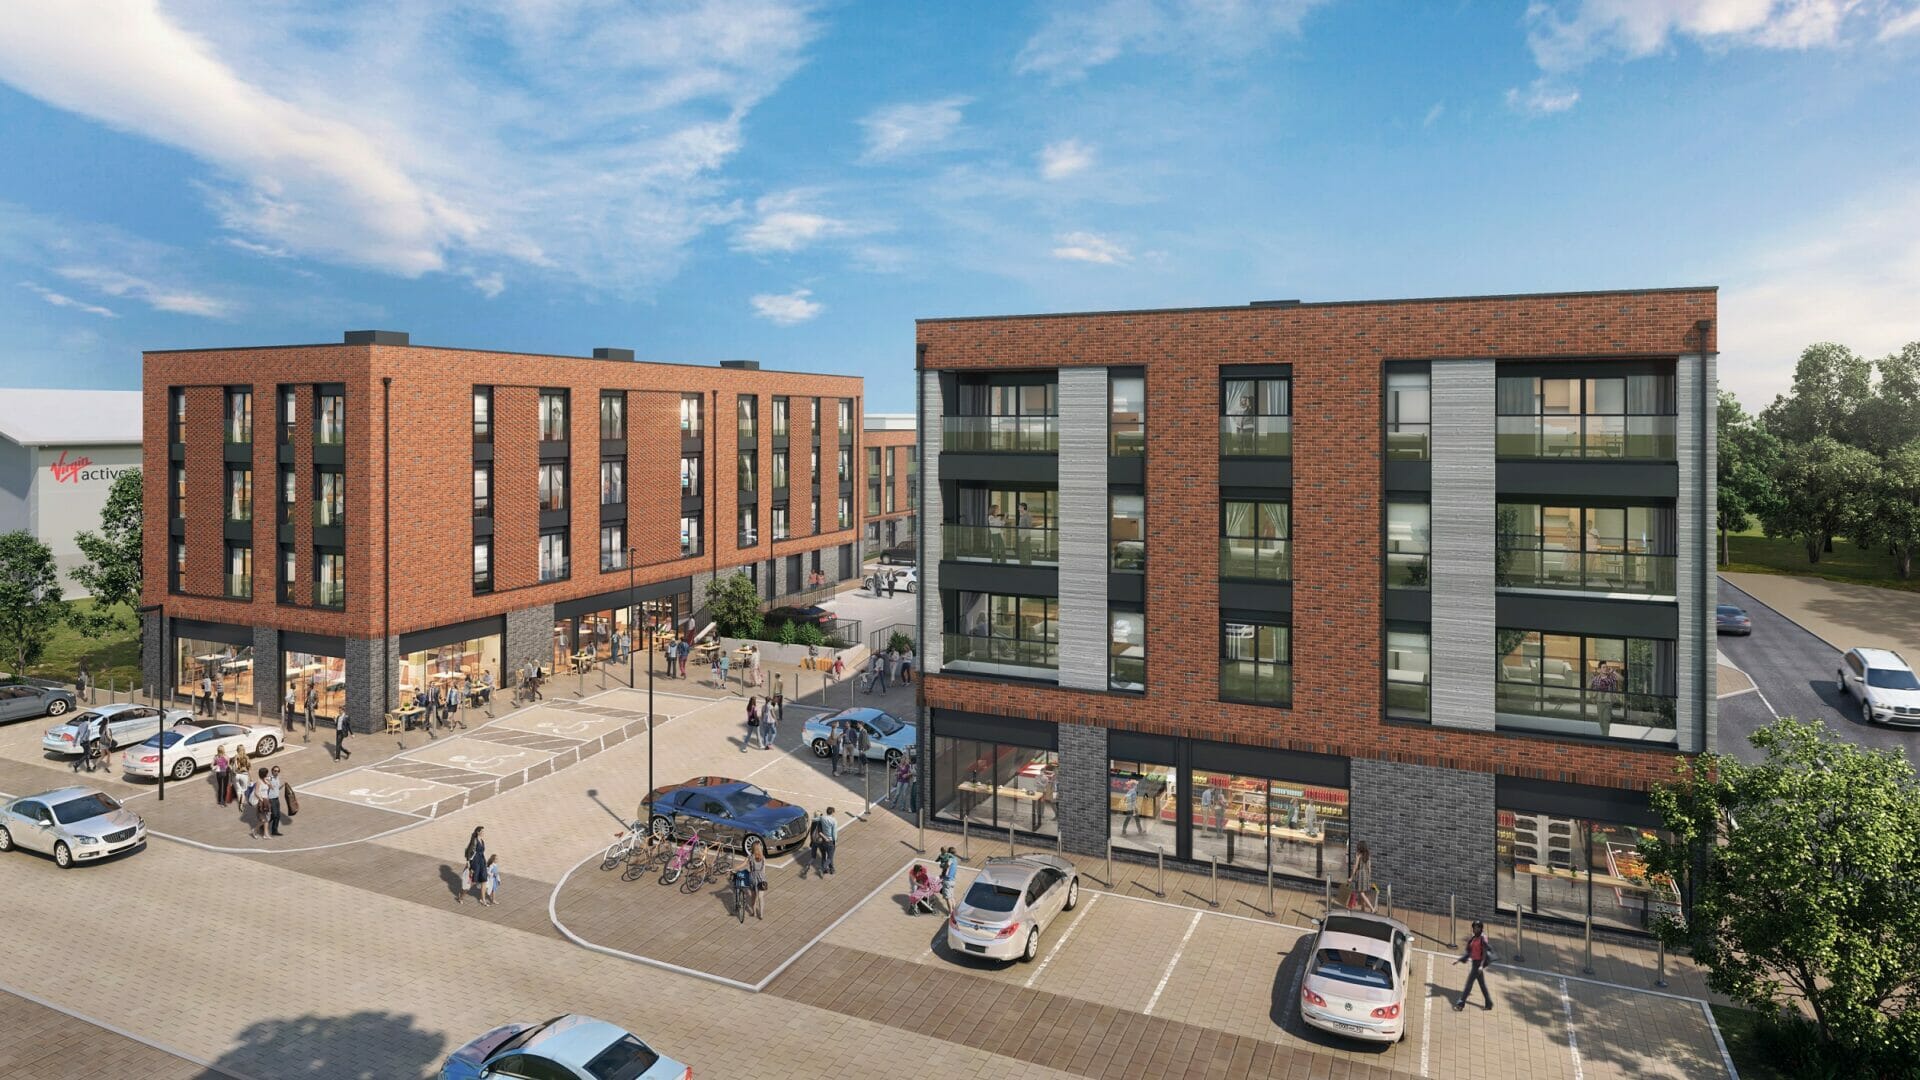 Works start on £7.5m mixed-use residential development in Solihull @GFTomlinson